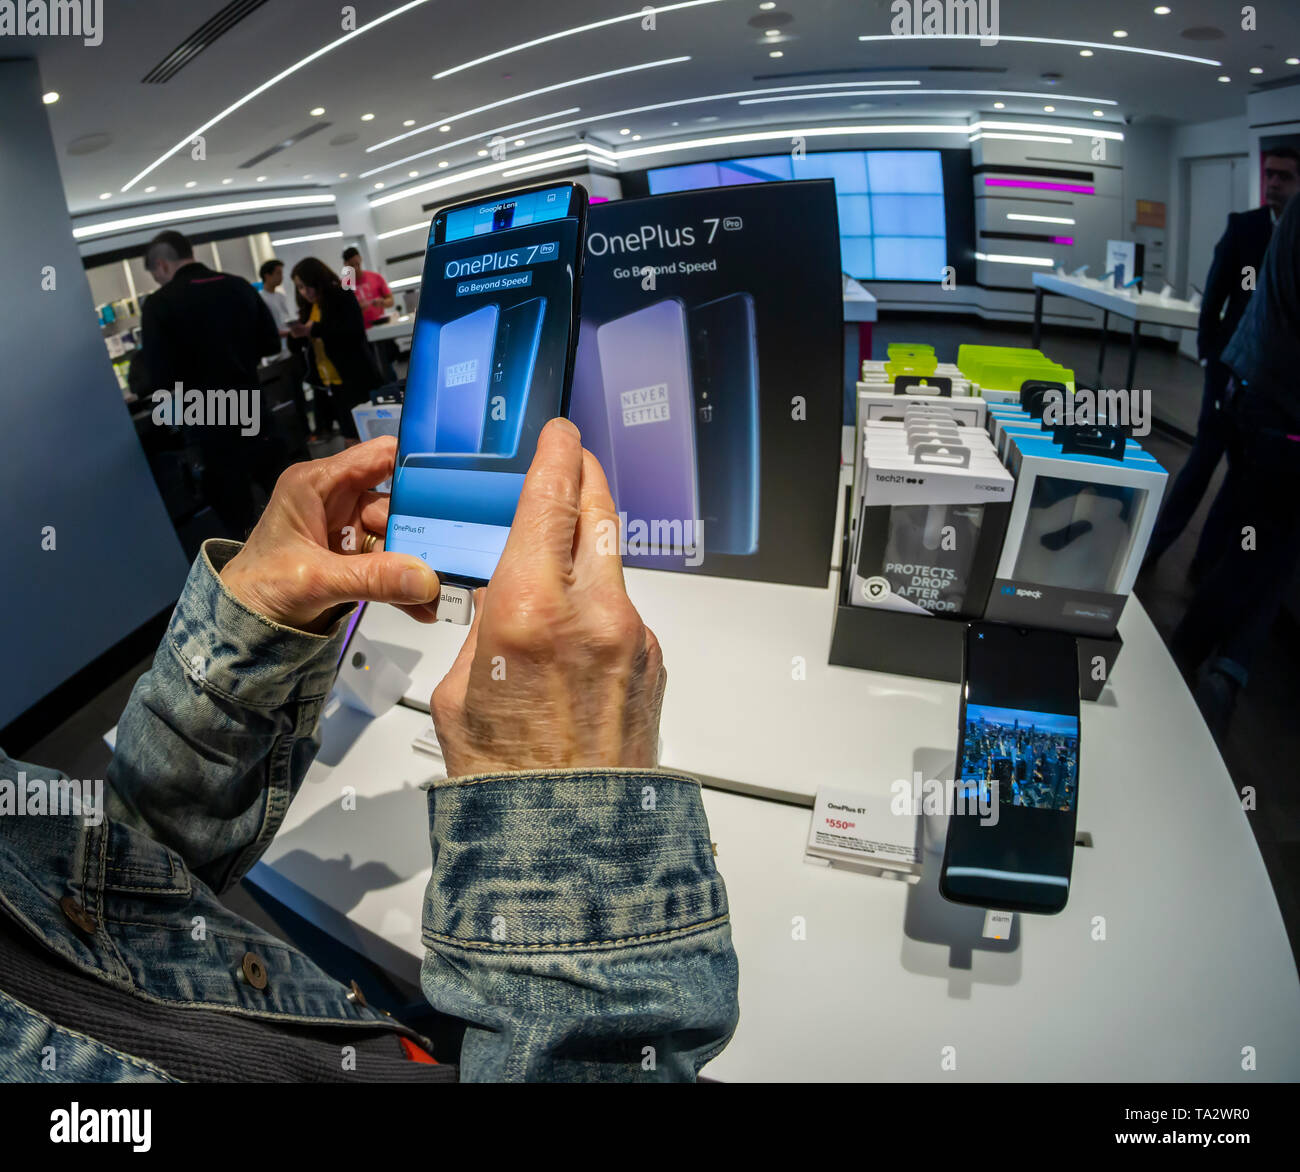 A visitor to a T-Mobile store in New York tries out the OnePlus 7 Pro smartphone on Thursday, May 16, 2019. The smartphone brand has a following which admires the smartphones for their features but with a lower price point than the iPhone or Samsung flagship devices.  (Â© Richard B. Levine) Stock Photo